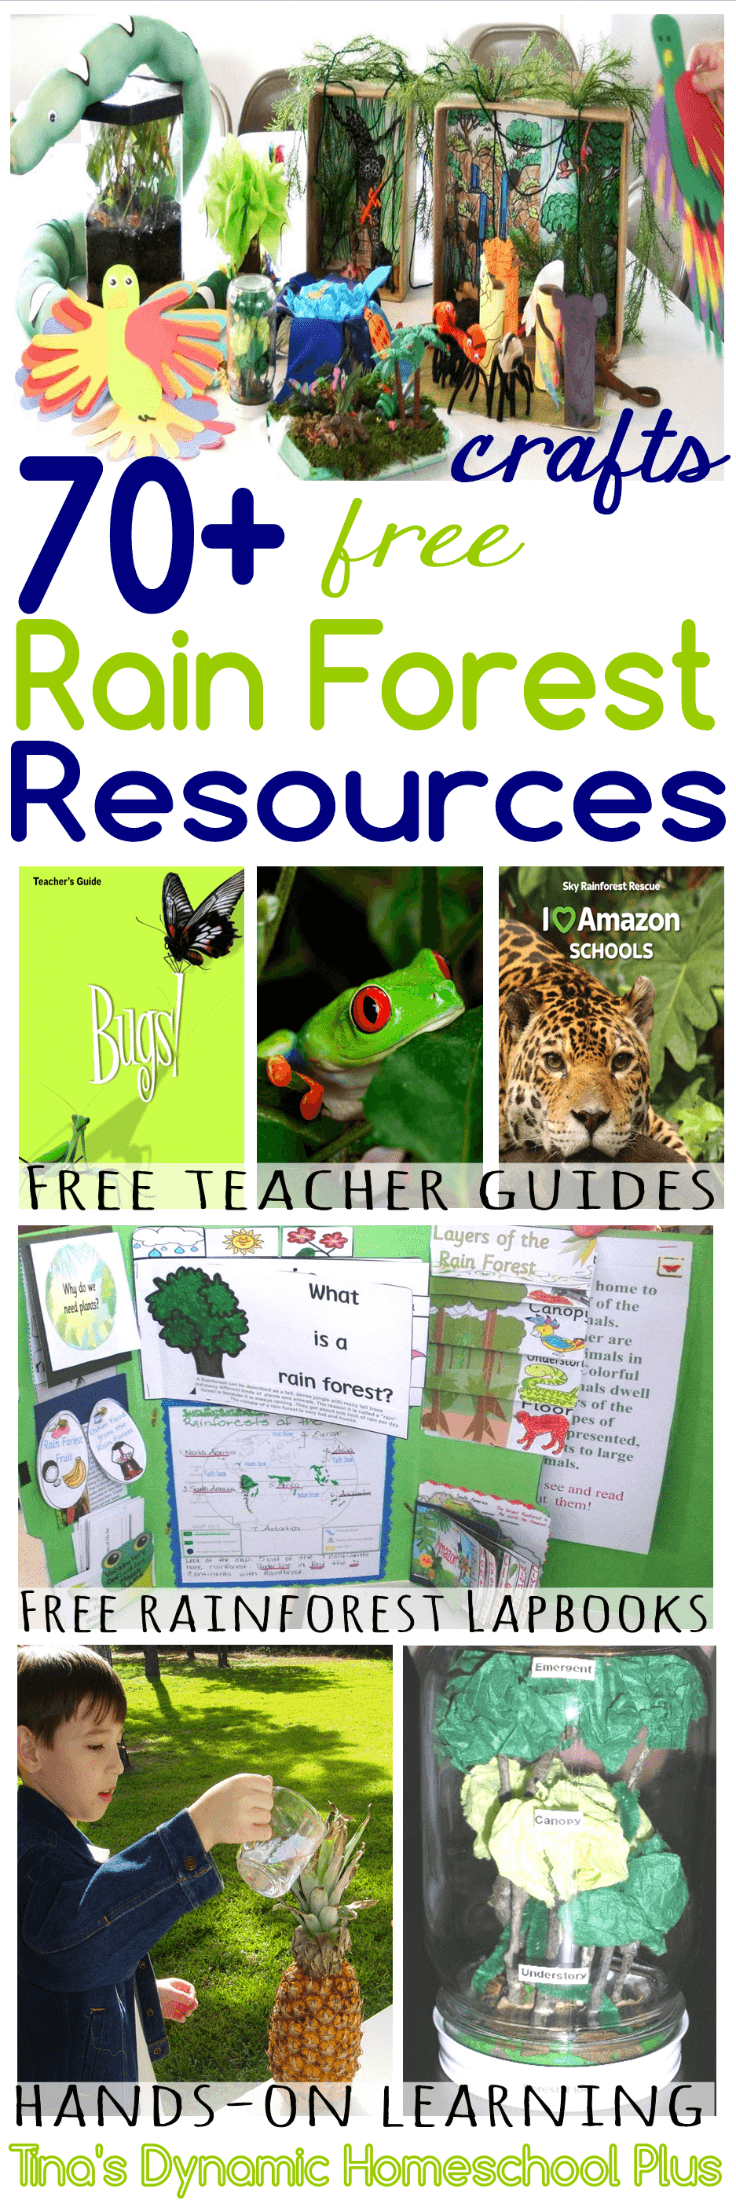 Over 70 Free Amazon Rain Forest Resources! Great for a homeschool unit study or just learning about the Amazon Rain Forest. Click here to grab these AWESOME resources!